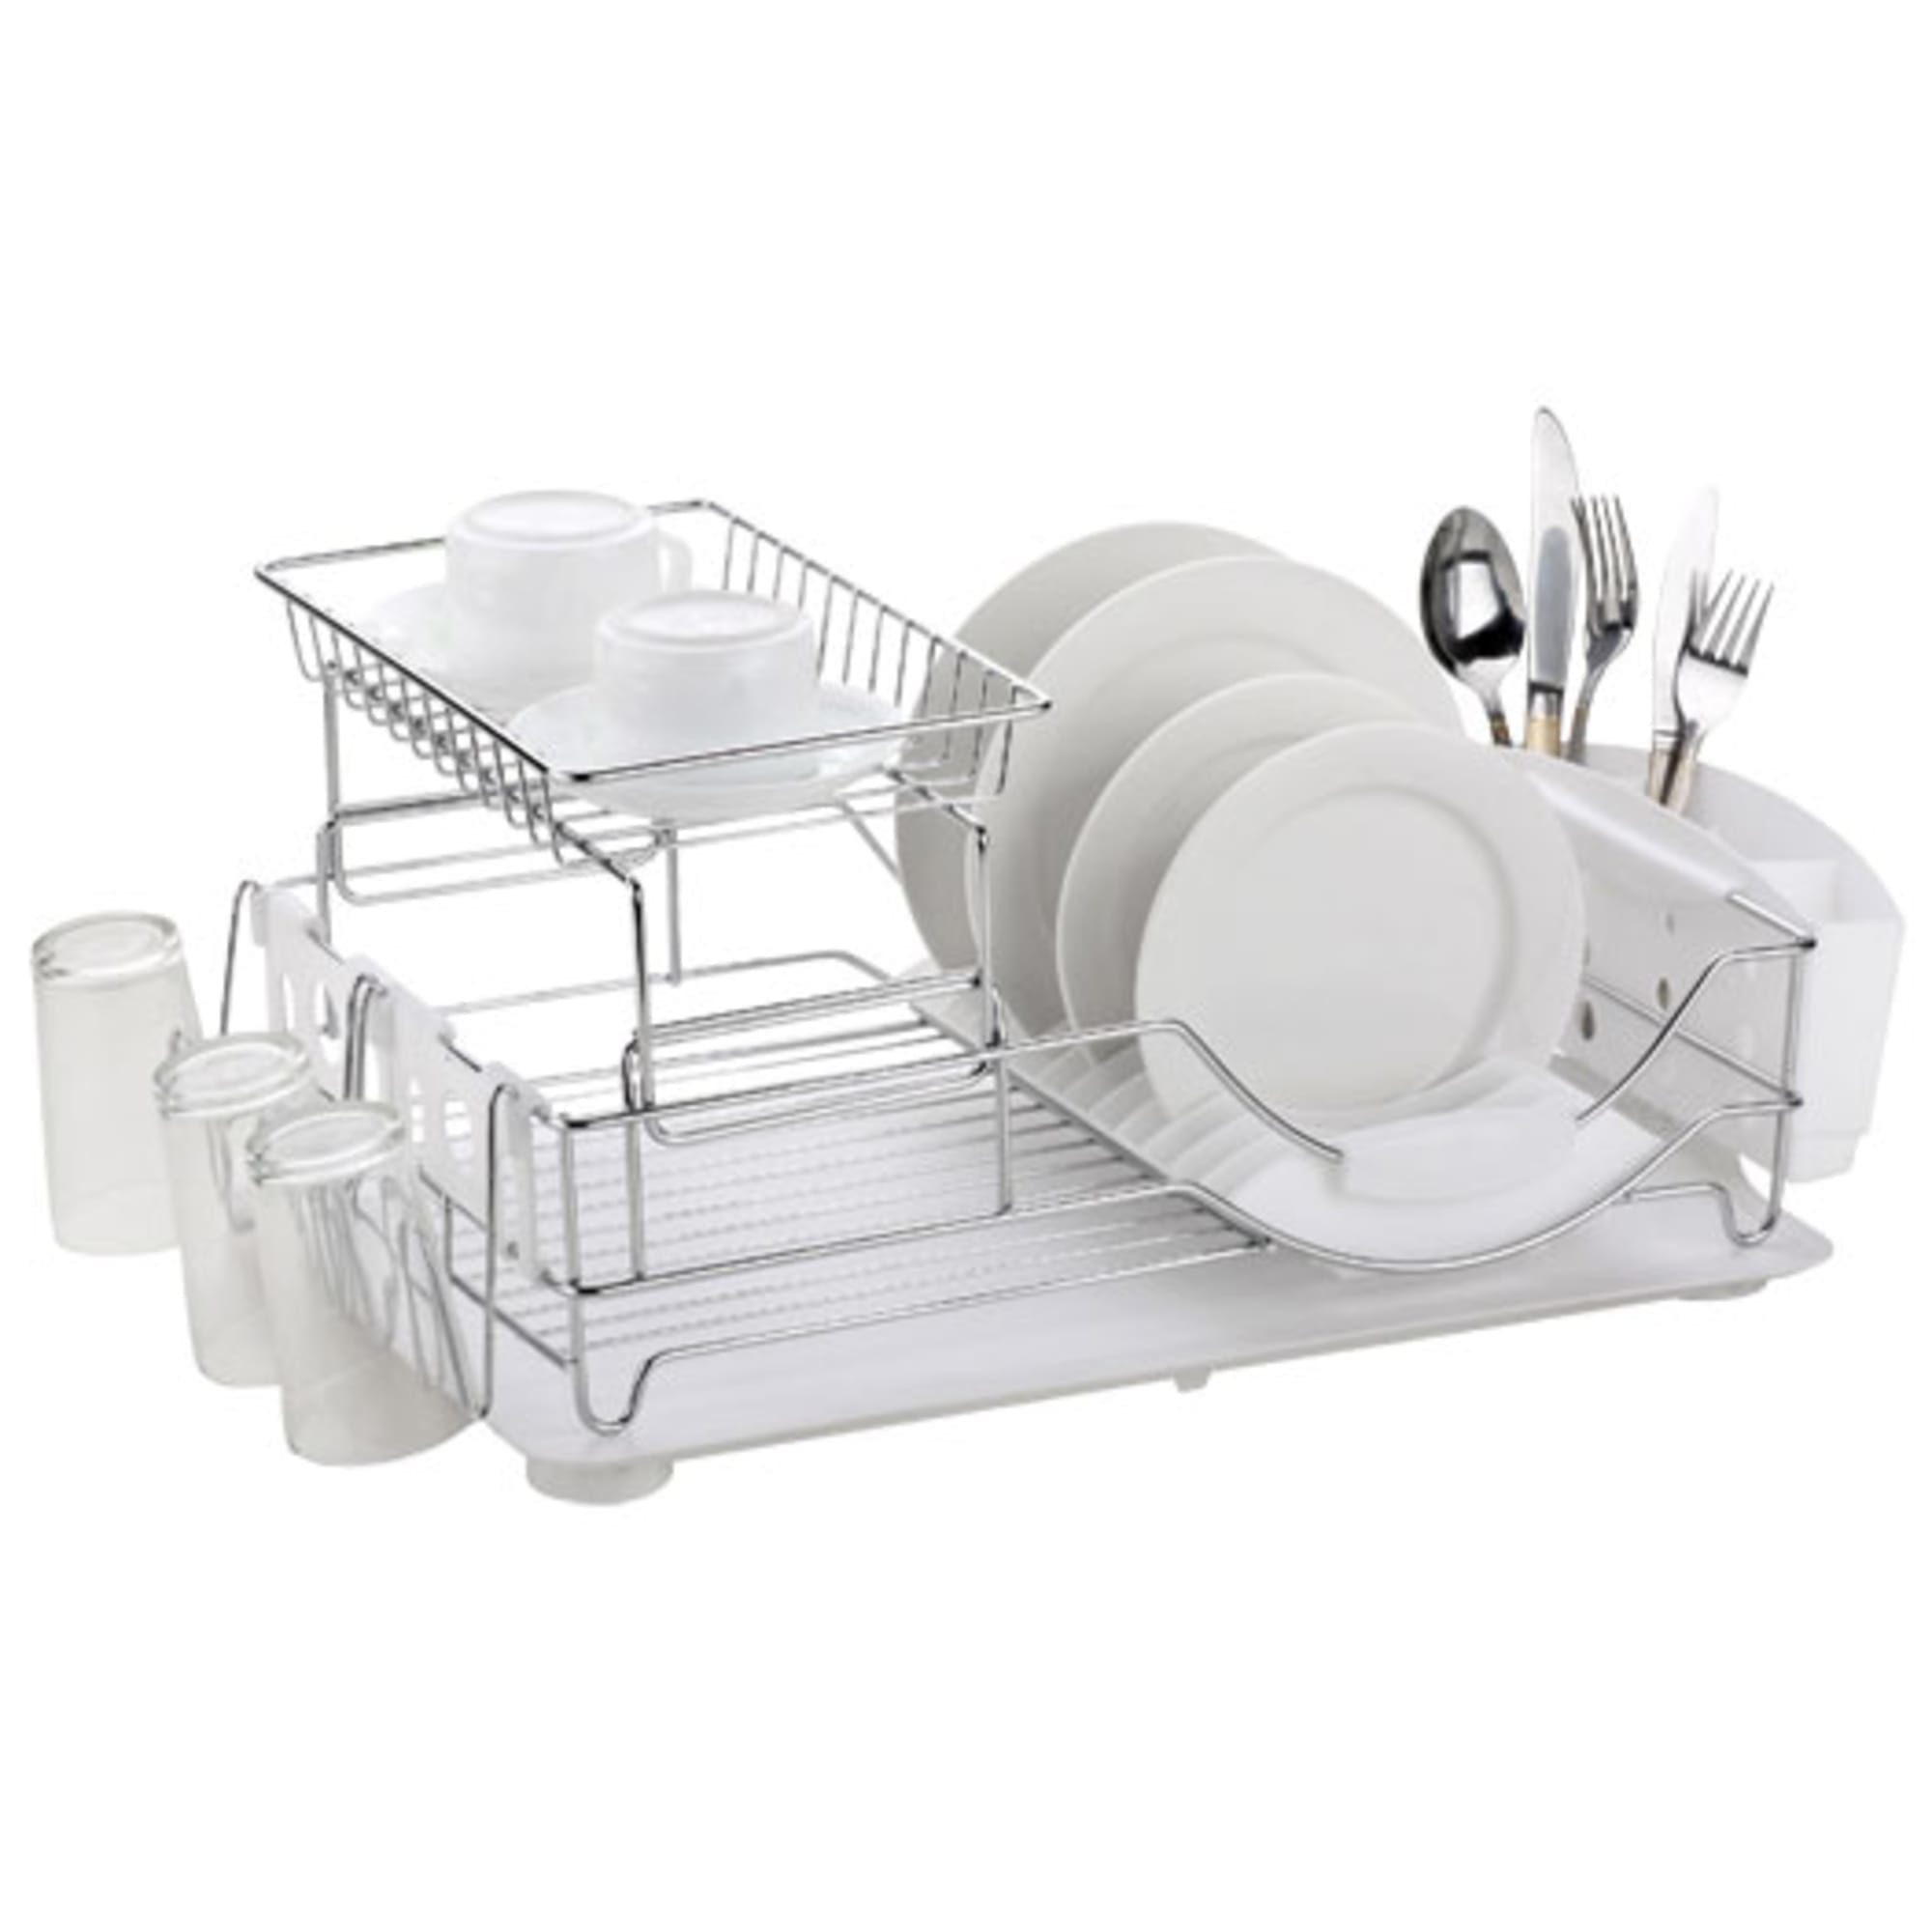 Home Basics Metal 2-Tier Deluxe Dish Drainer $30.00 EACH, CASE PACK OF 6